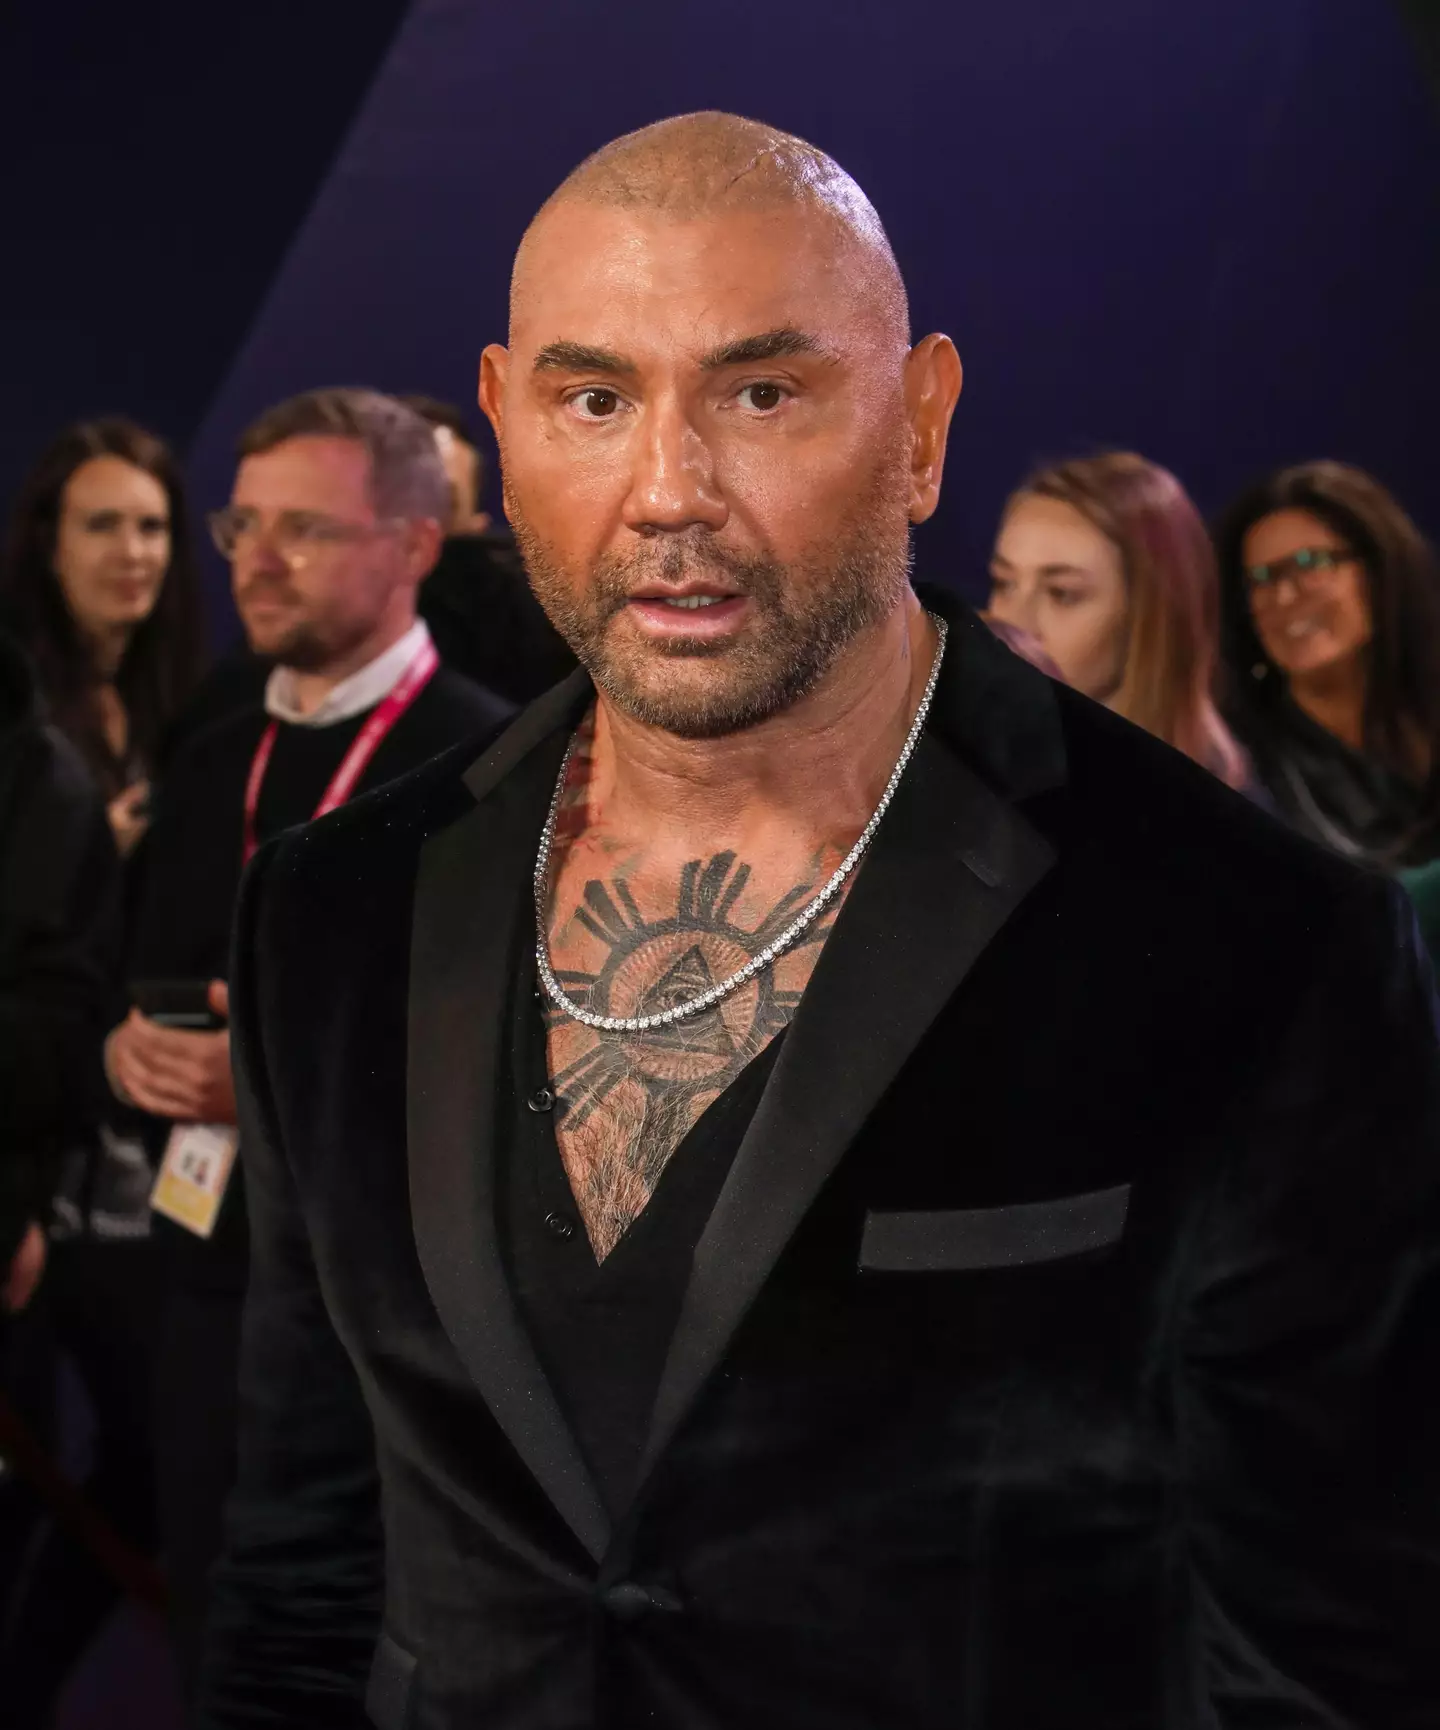 Dave Bautista wants to be a hunky romantic interest, gosh darn it.